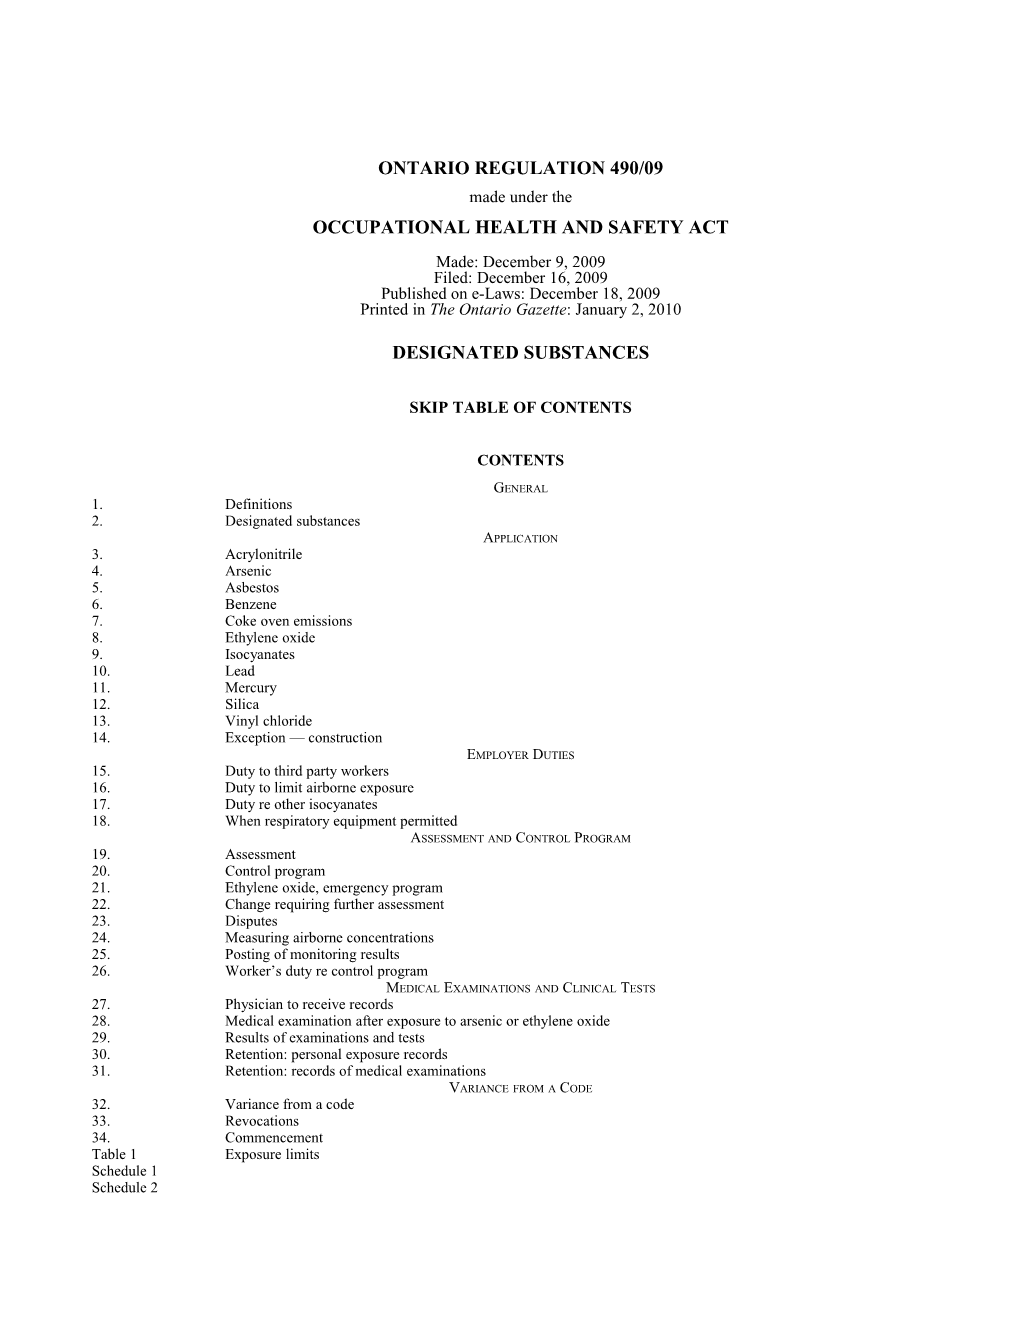 OCCUPATIONAL HEALTH and SAFETY ACT - O. Reg. 490/09 s1